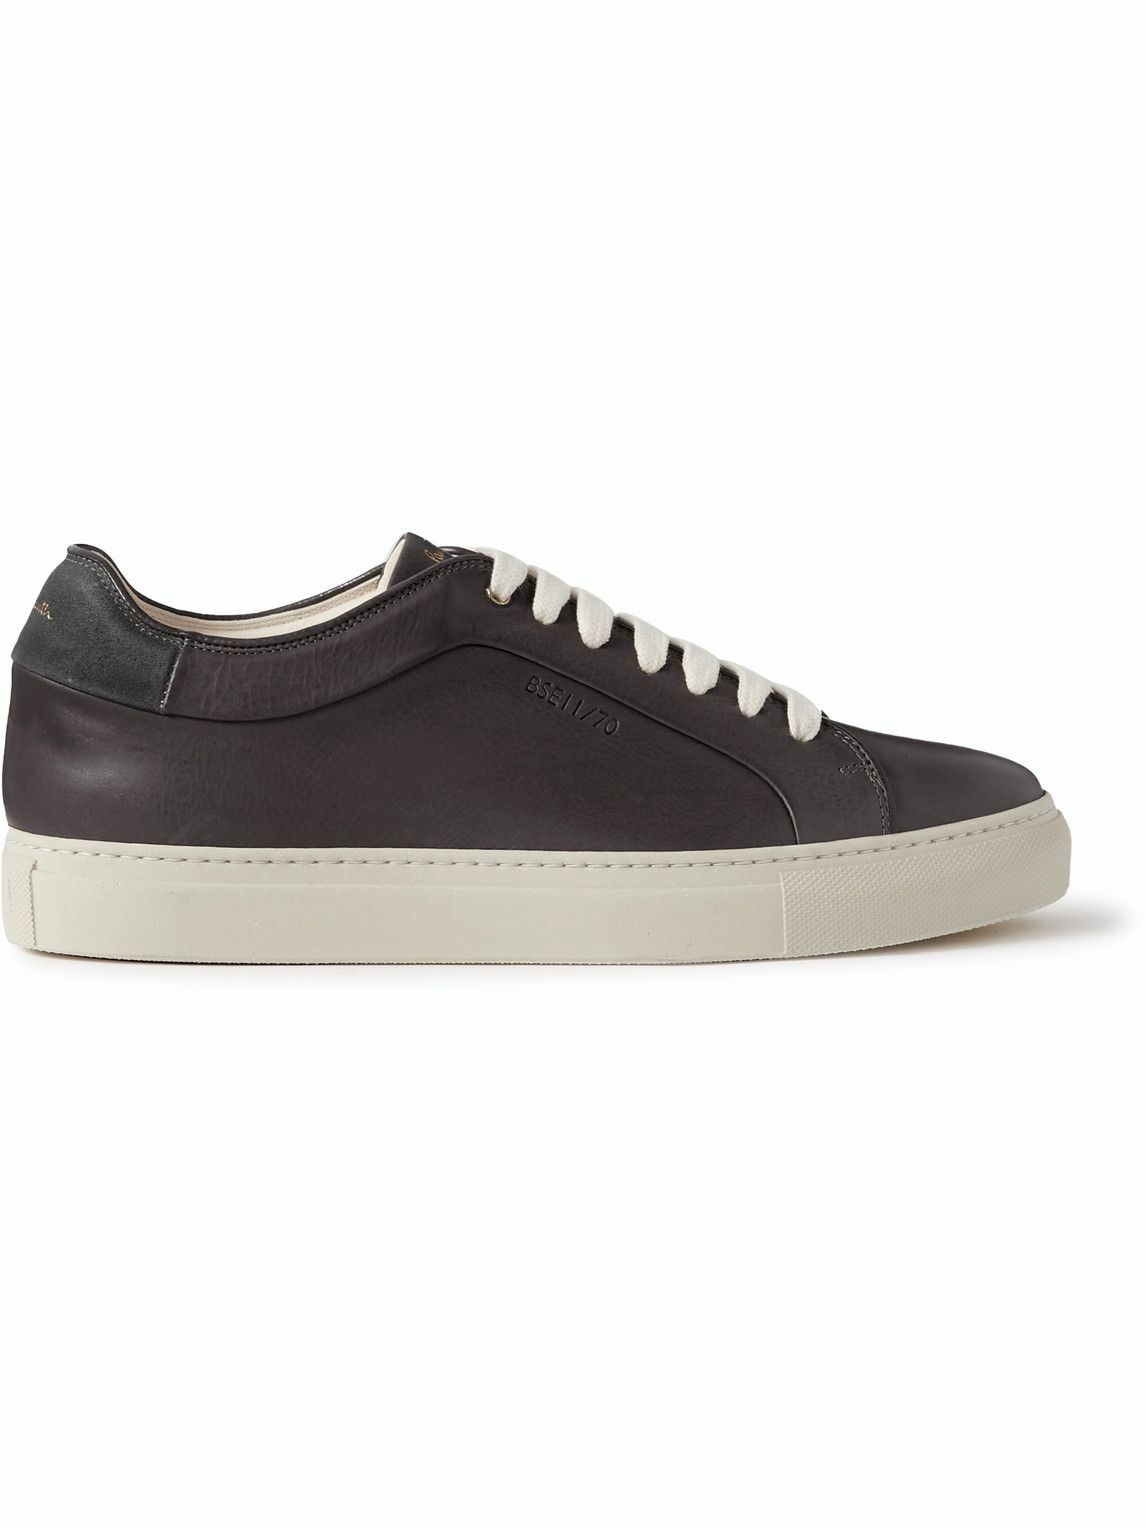 Photo: Paul Smith - Basso ECO Leather Sneakers - Gray